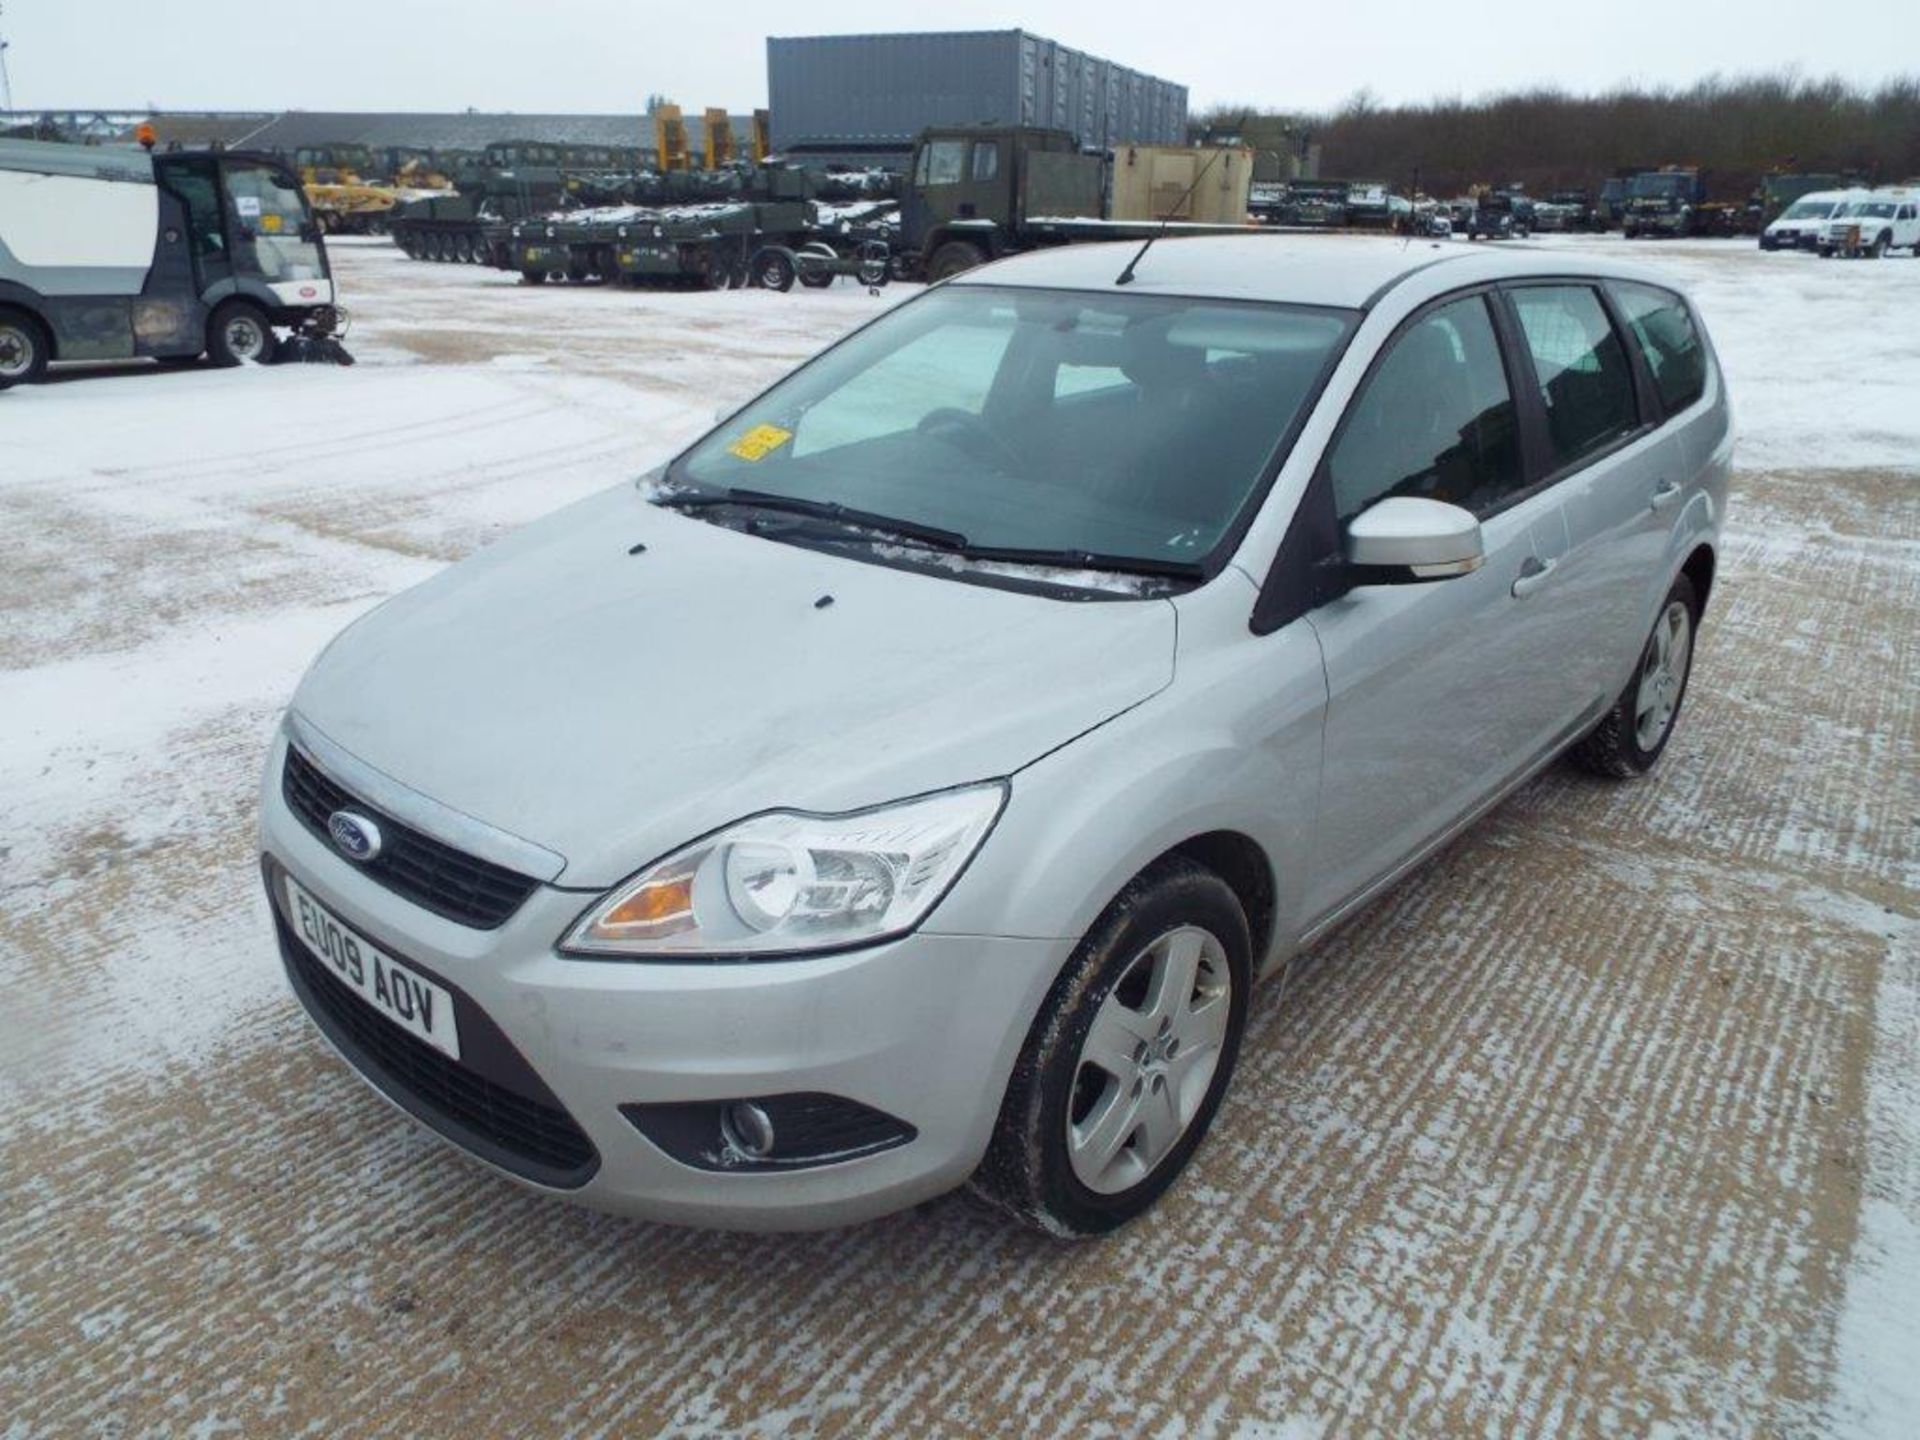 Ford Focus Style 1.8 TD 115 Estate - Only 25,174 Miles! - Image 3 of 21